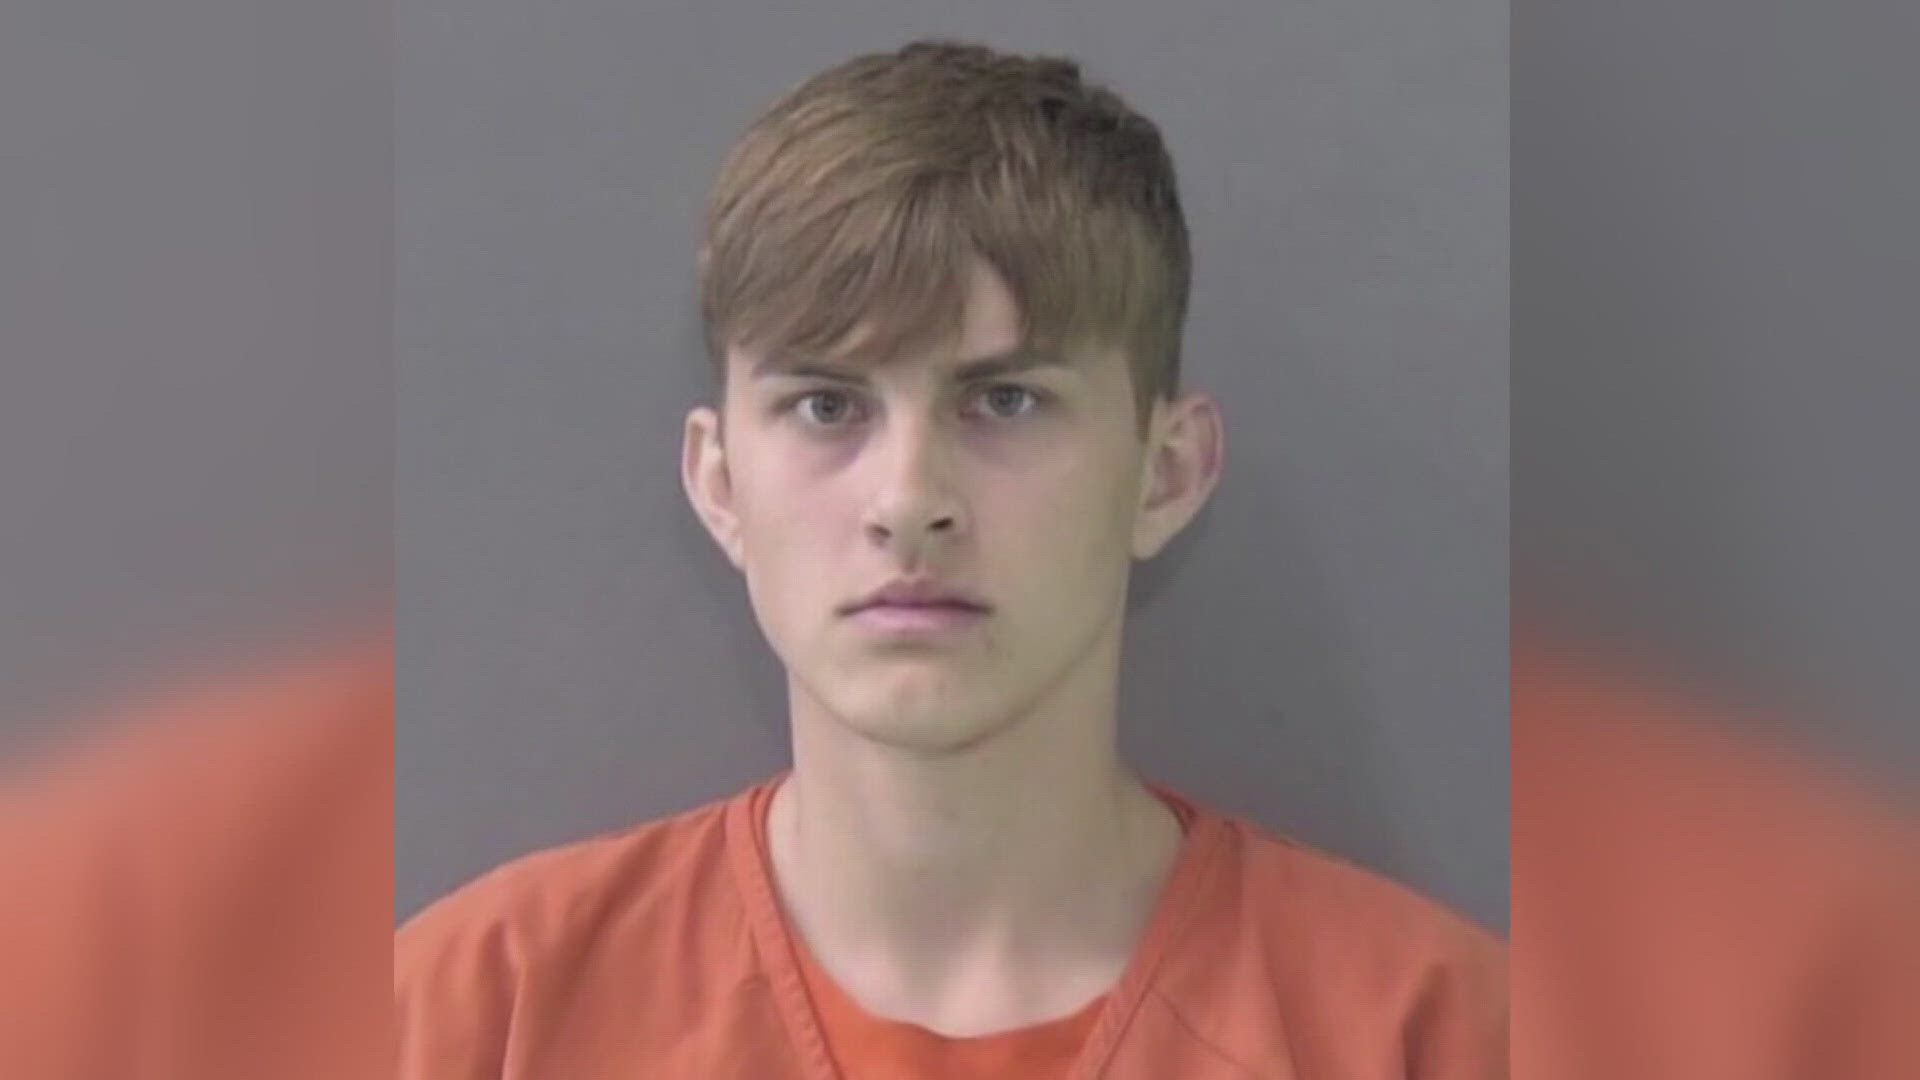 Caysen Allison was charged with murder after he allegedly stabbed Joe Ramirez, 18, multiple times in a Belton High School bathroom in 2022.